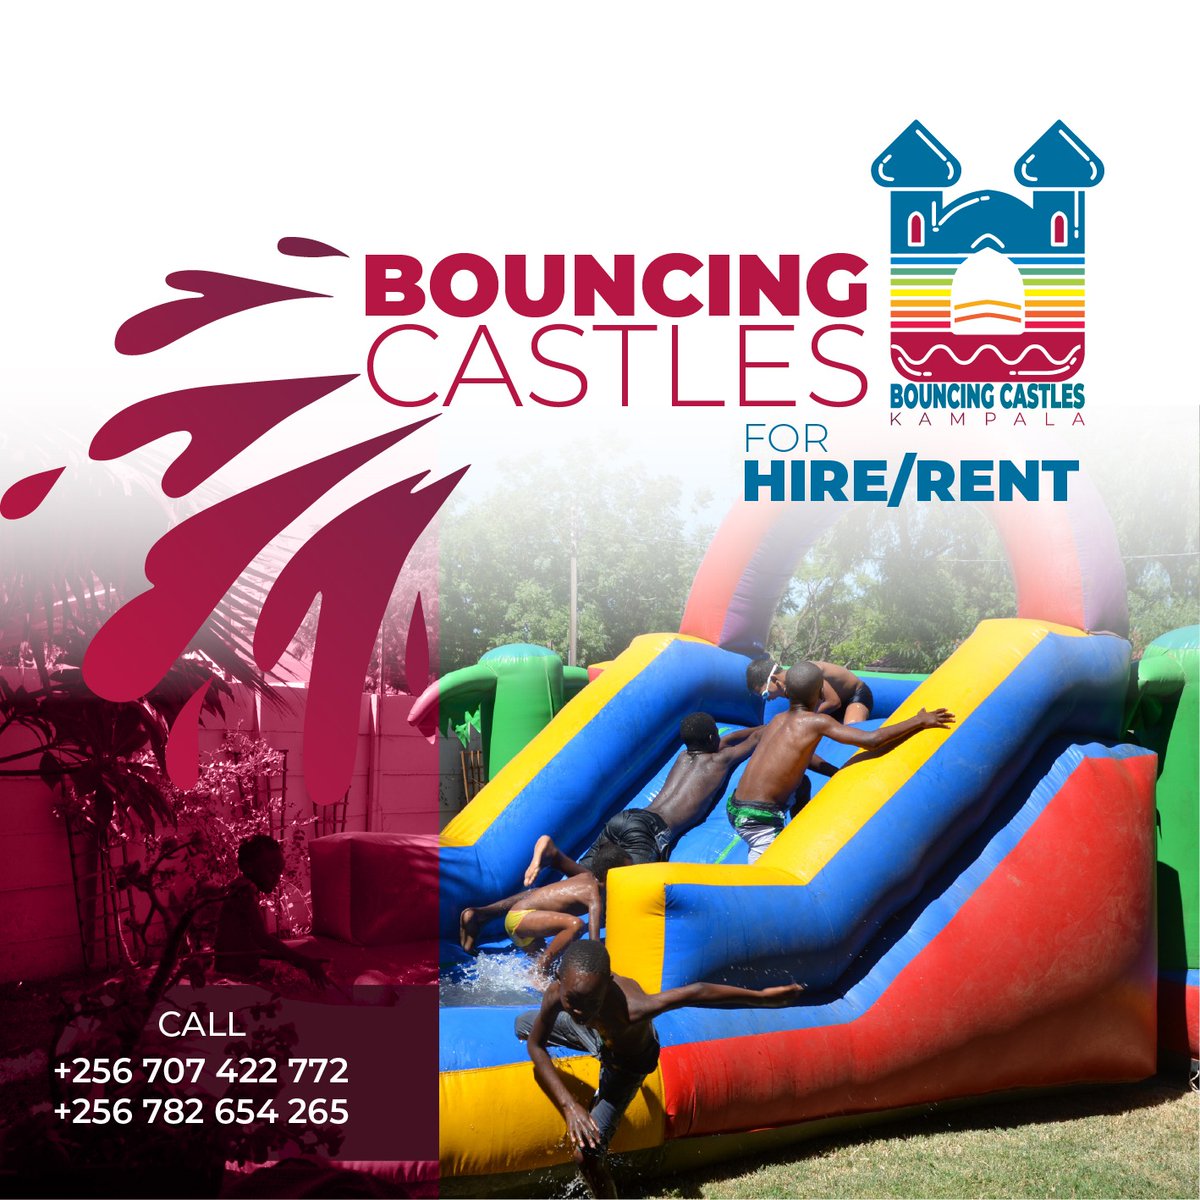 🎉🏰 Exciting News! 🏰🎉
Looking to take your party to the next level of FUN? 🎈 Look no further! We ars here to make your event an unforgettable experience! 🥳🎊
🏰 We hire top-quality bouncing castles for all occasions! 

#partyequipment #bouncingcastlesforhire
#bouncingcastle